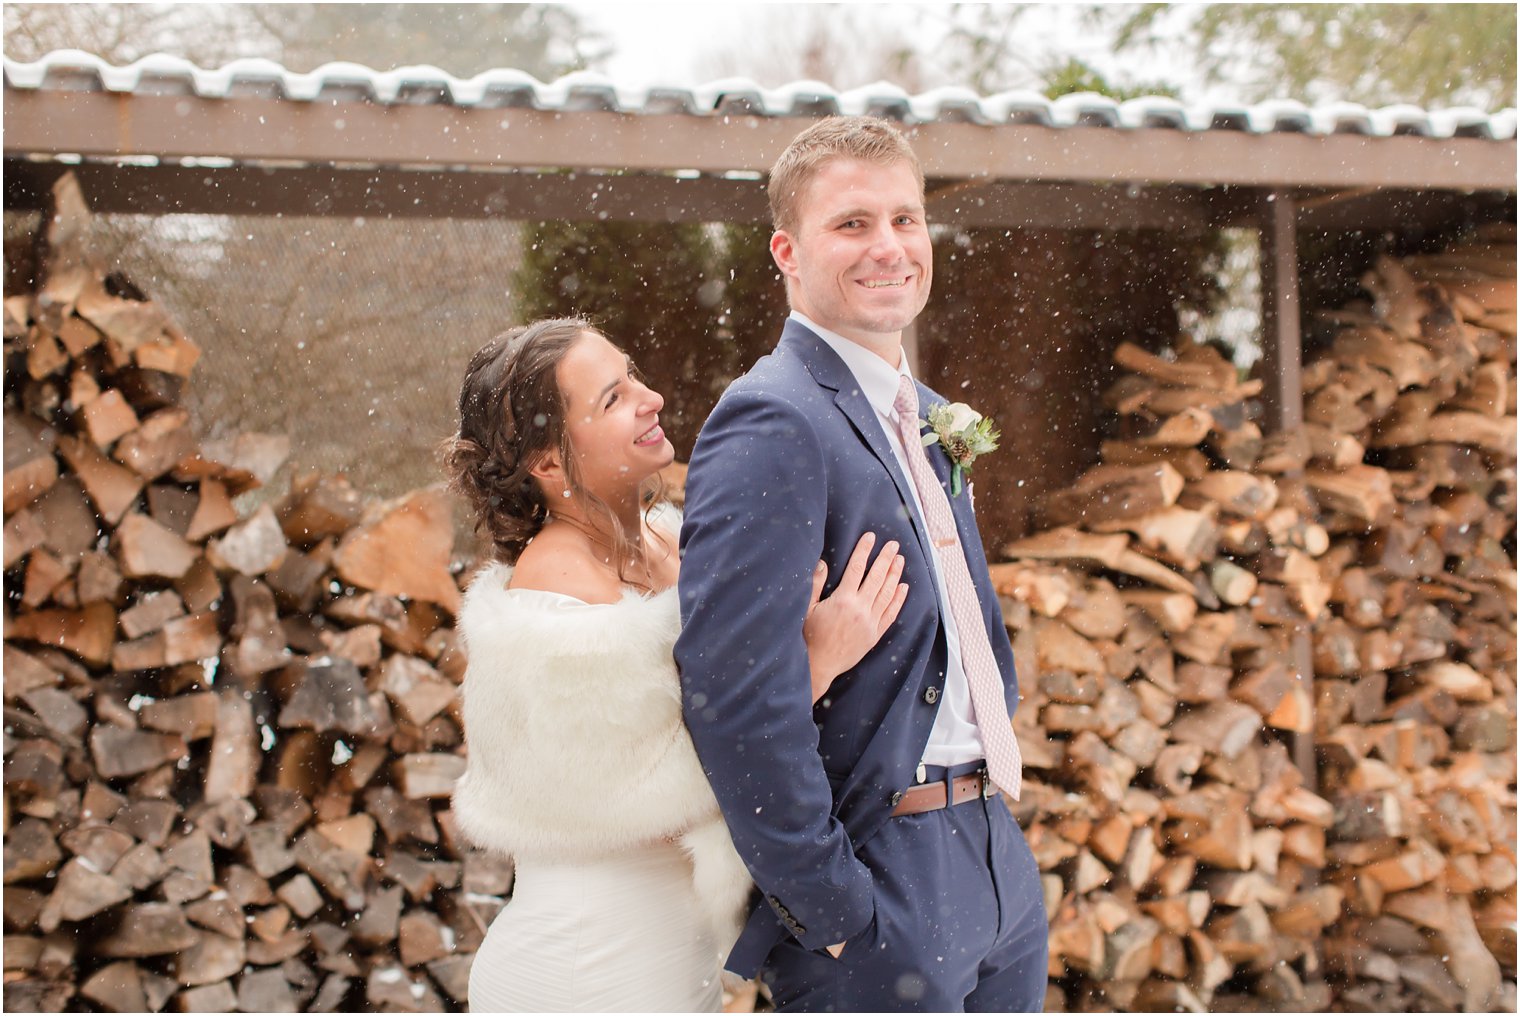 Formal portrait of bride and groom in the snow | Stone House at Stirling Ridge in Warren, NJ